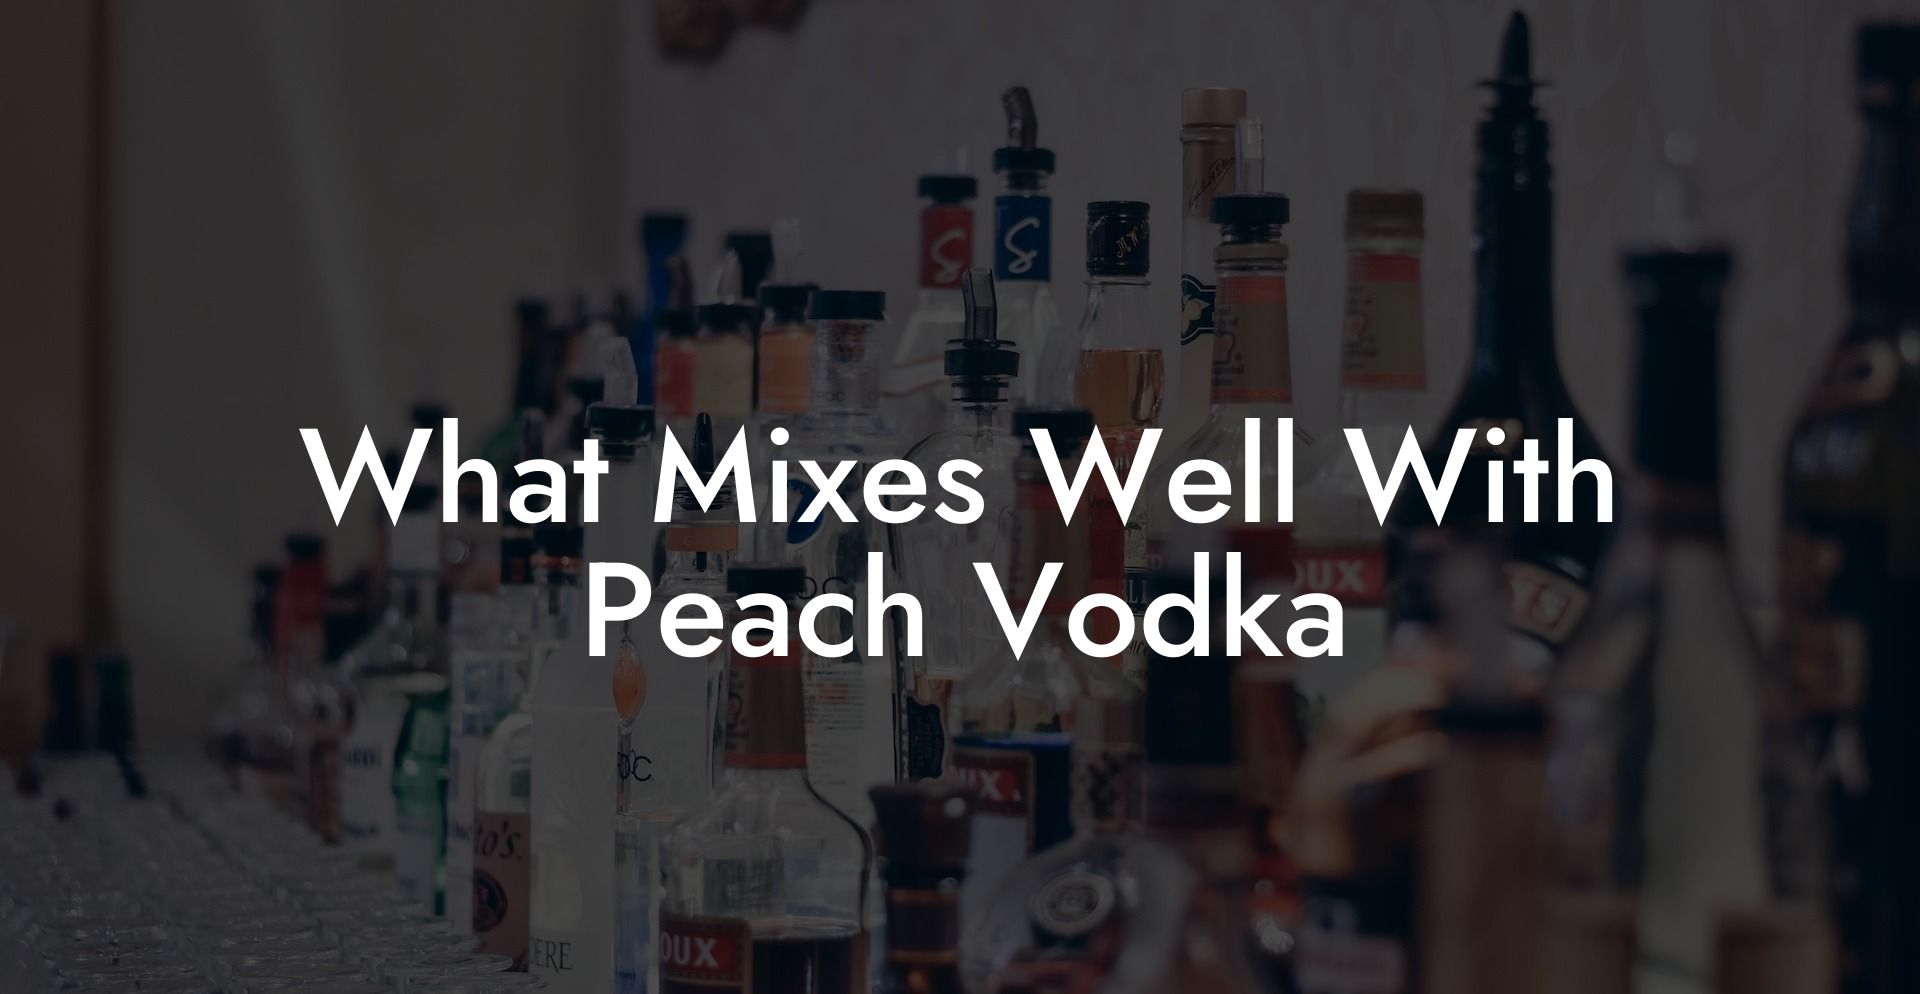 What Mixes Well With Peach Vodka